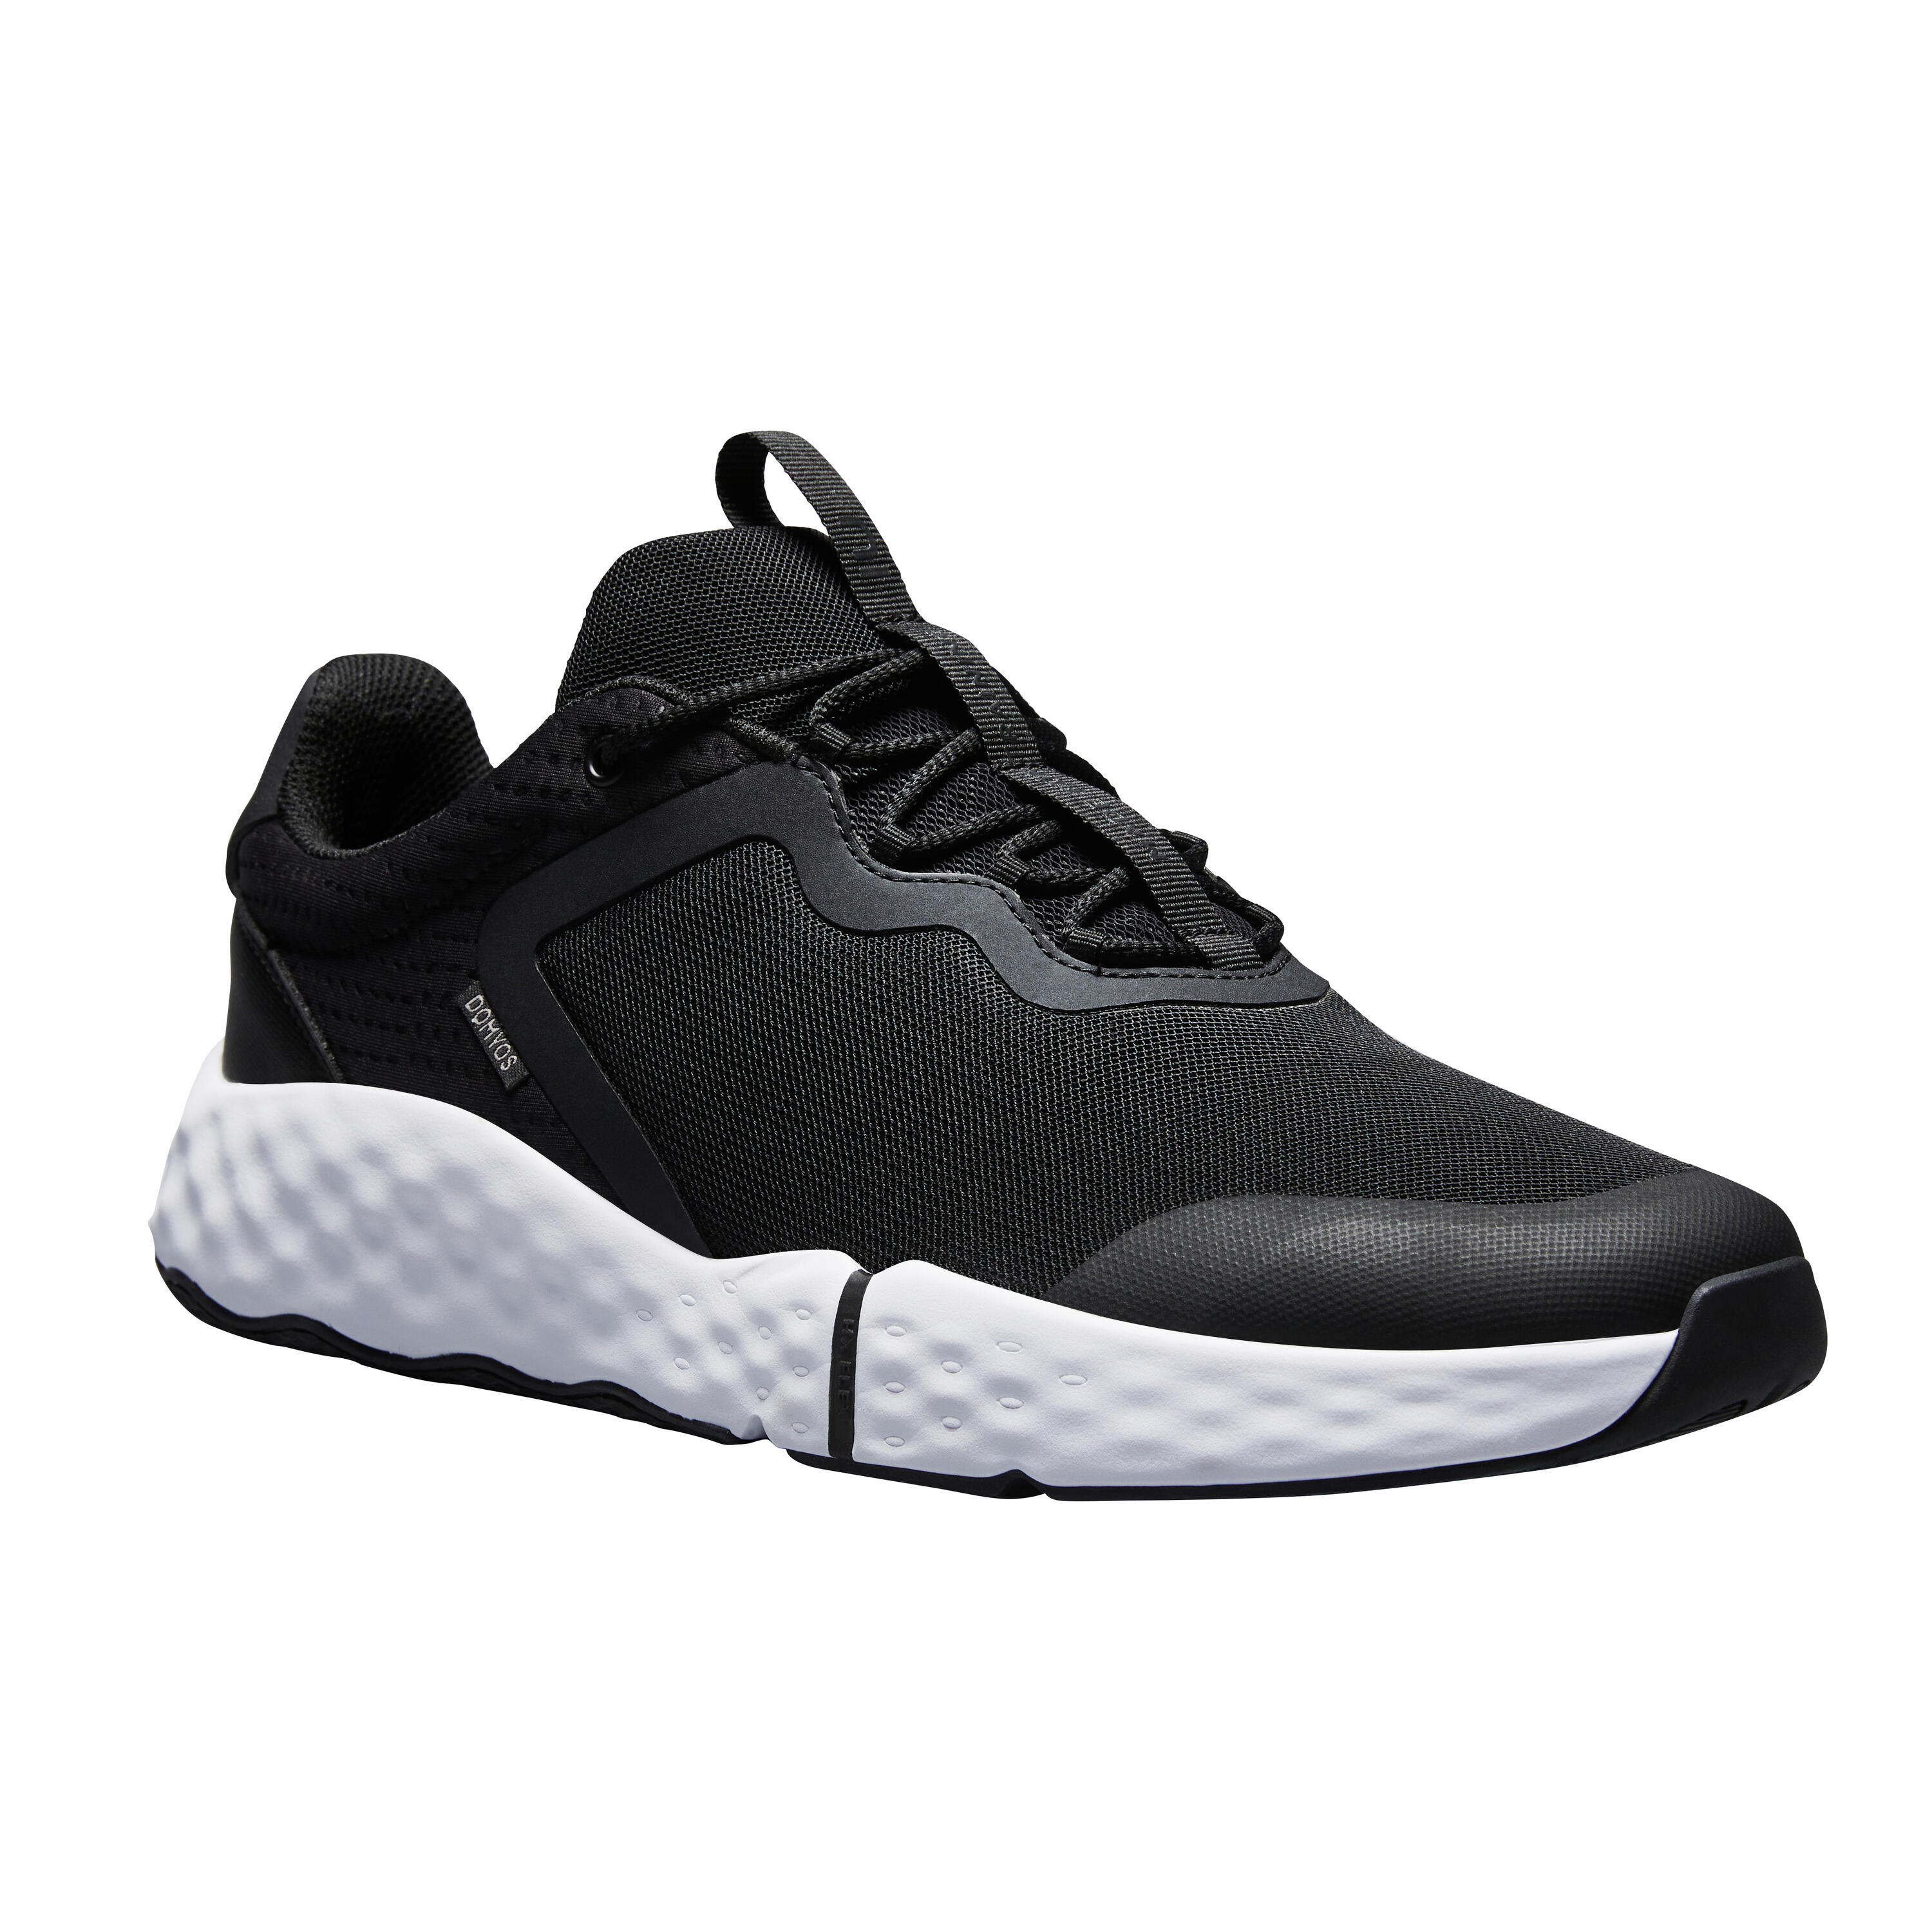 Men's Gym Trainers & Shoes